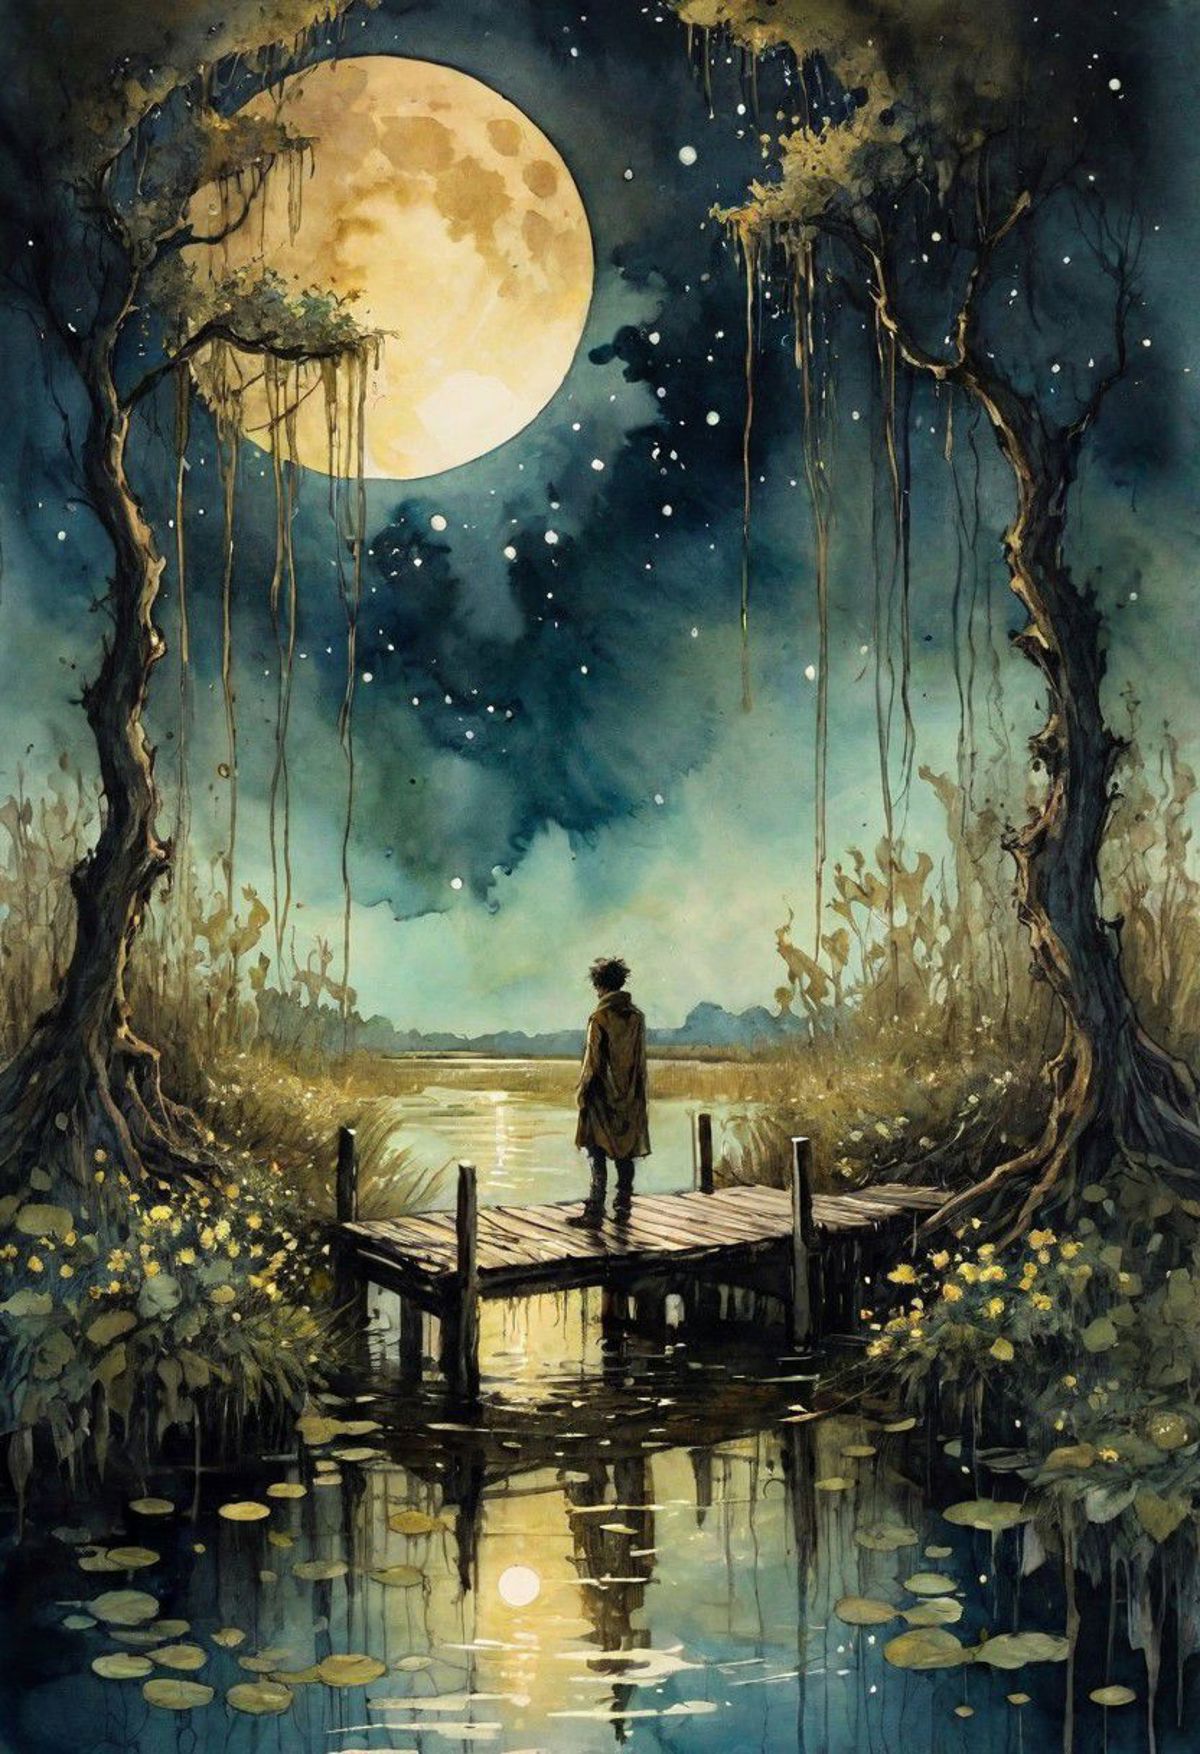 Painting of a man standing on a bridge under a full moon.